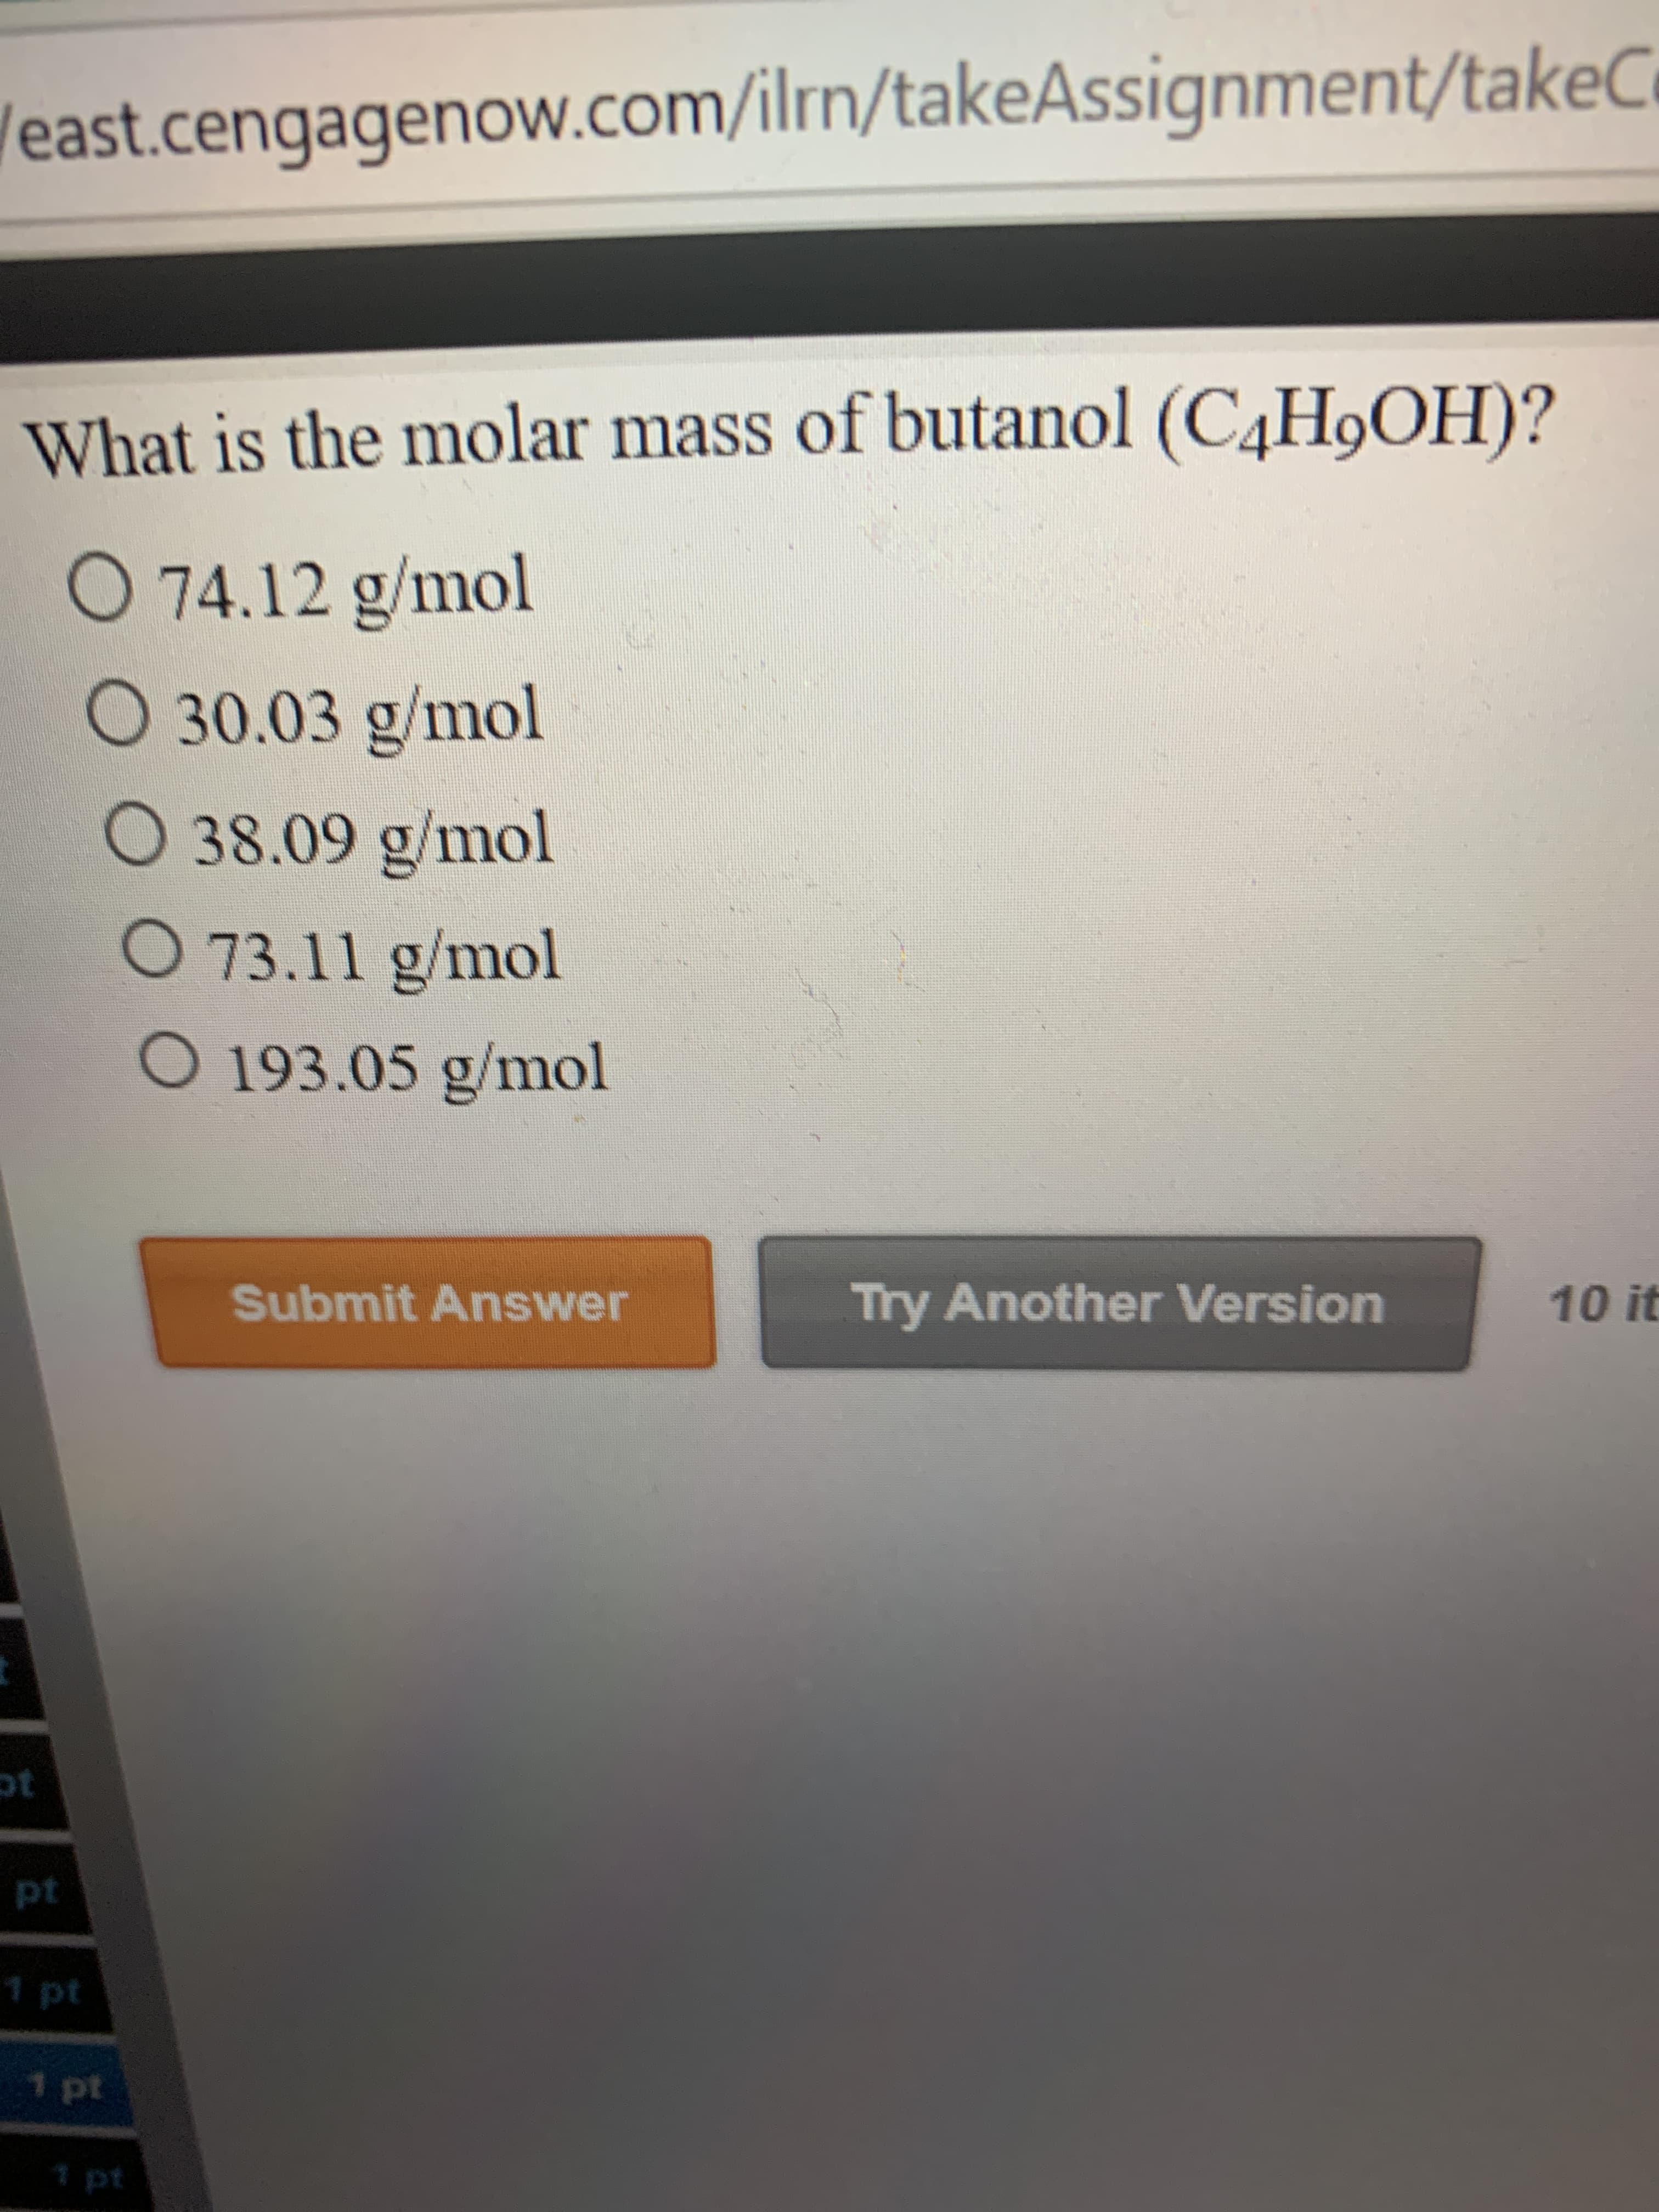 What is the molar mass of butanol (C4H9OH)?
